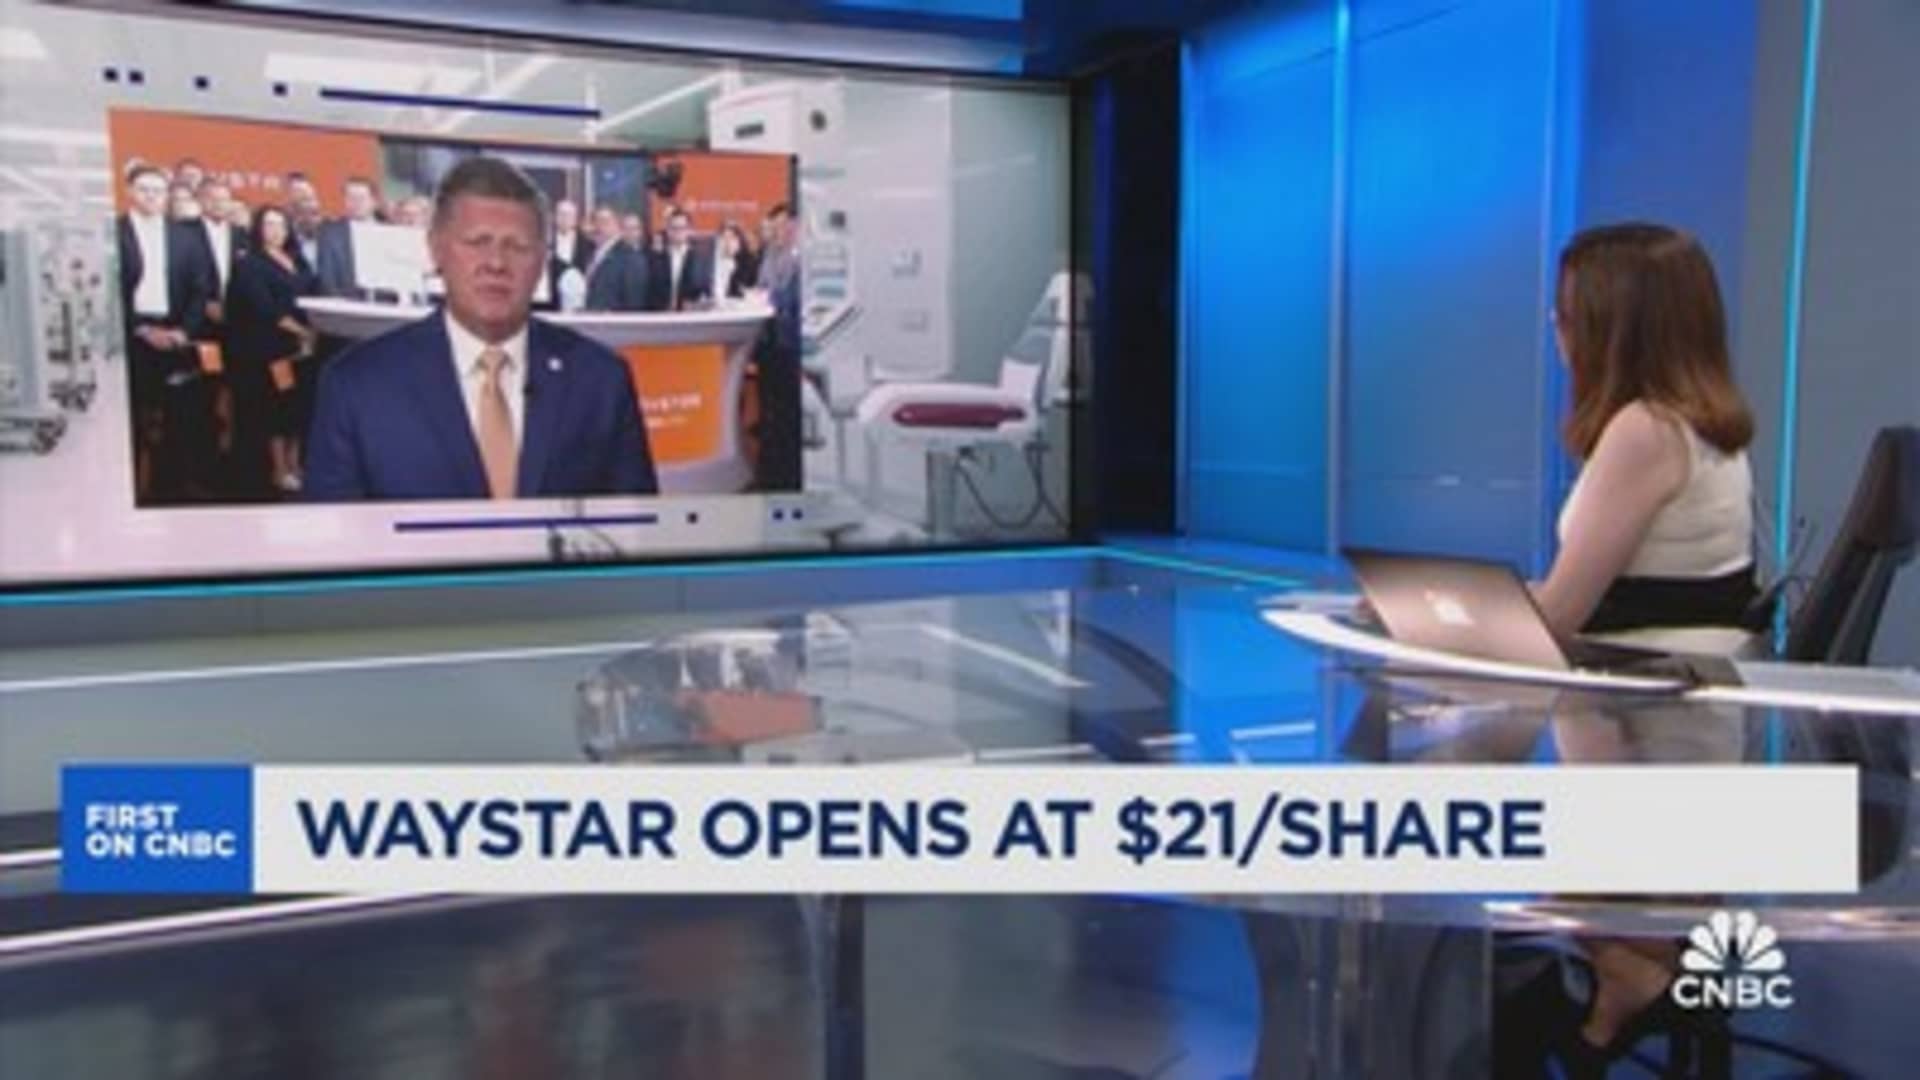 Waystar CEO: We’re building a visible, recurring revenue business driving profitable growth [Video]